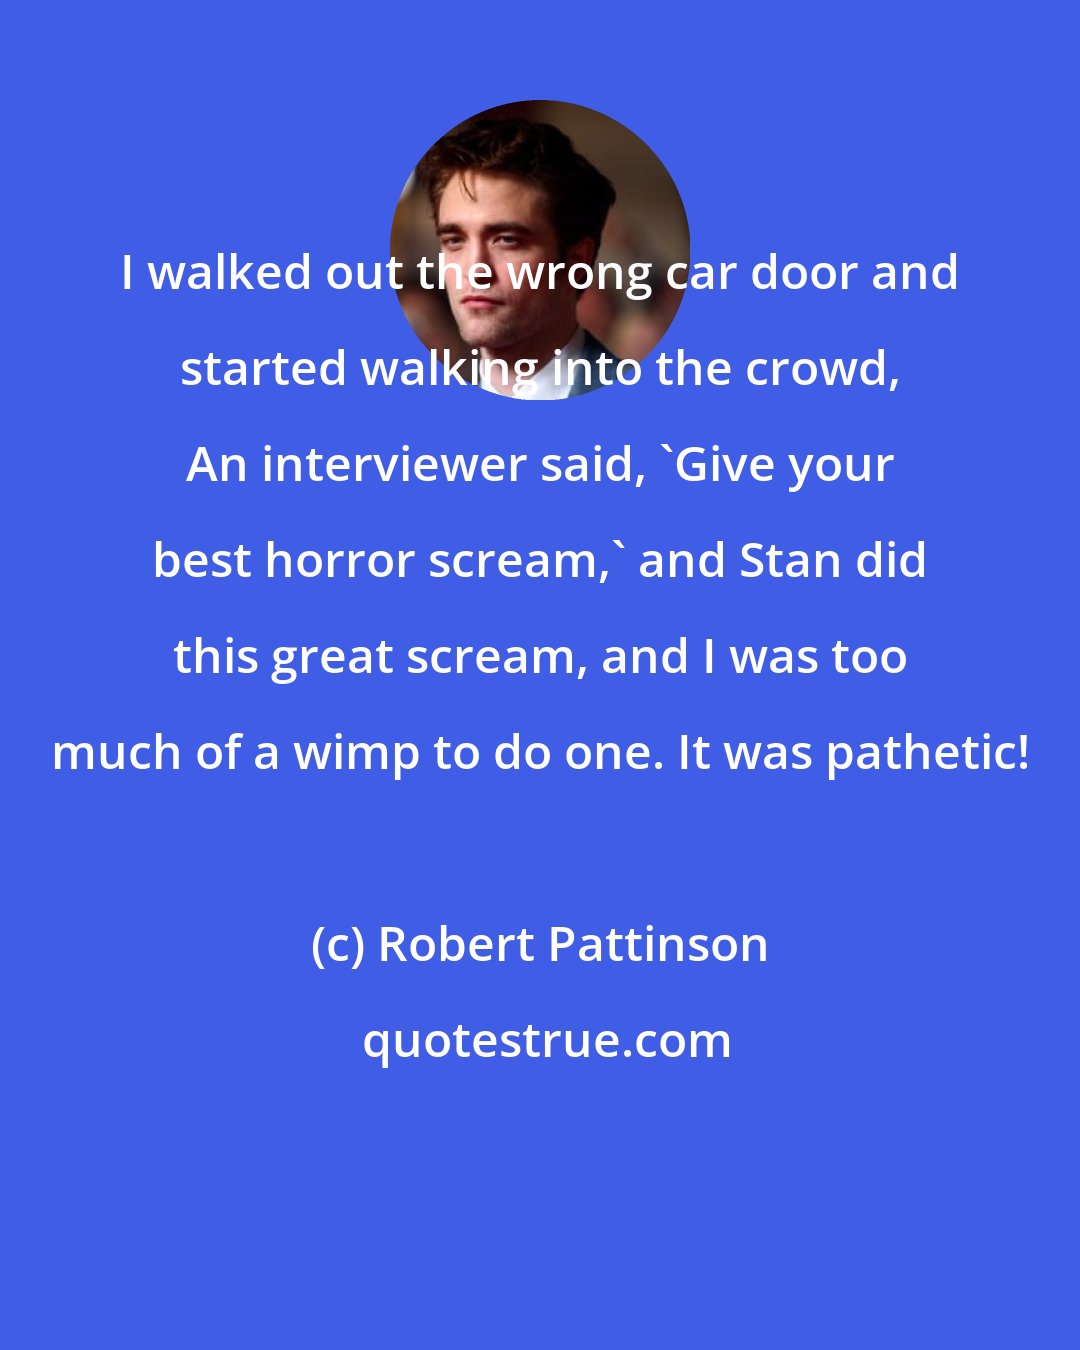 Robert Pattinson: I walked out the wrong car door and started walking into the crowd, An interviewer said, 'Give your best horror scream,' and Stan did this great scream, and I was too much of a wimp to do one. It was pathetic!